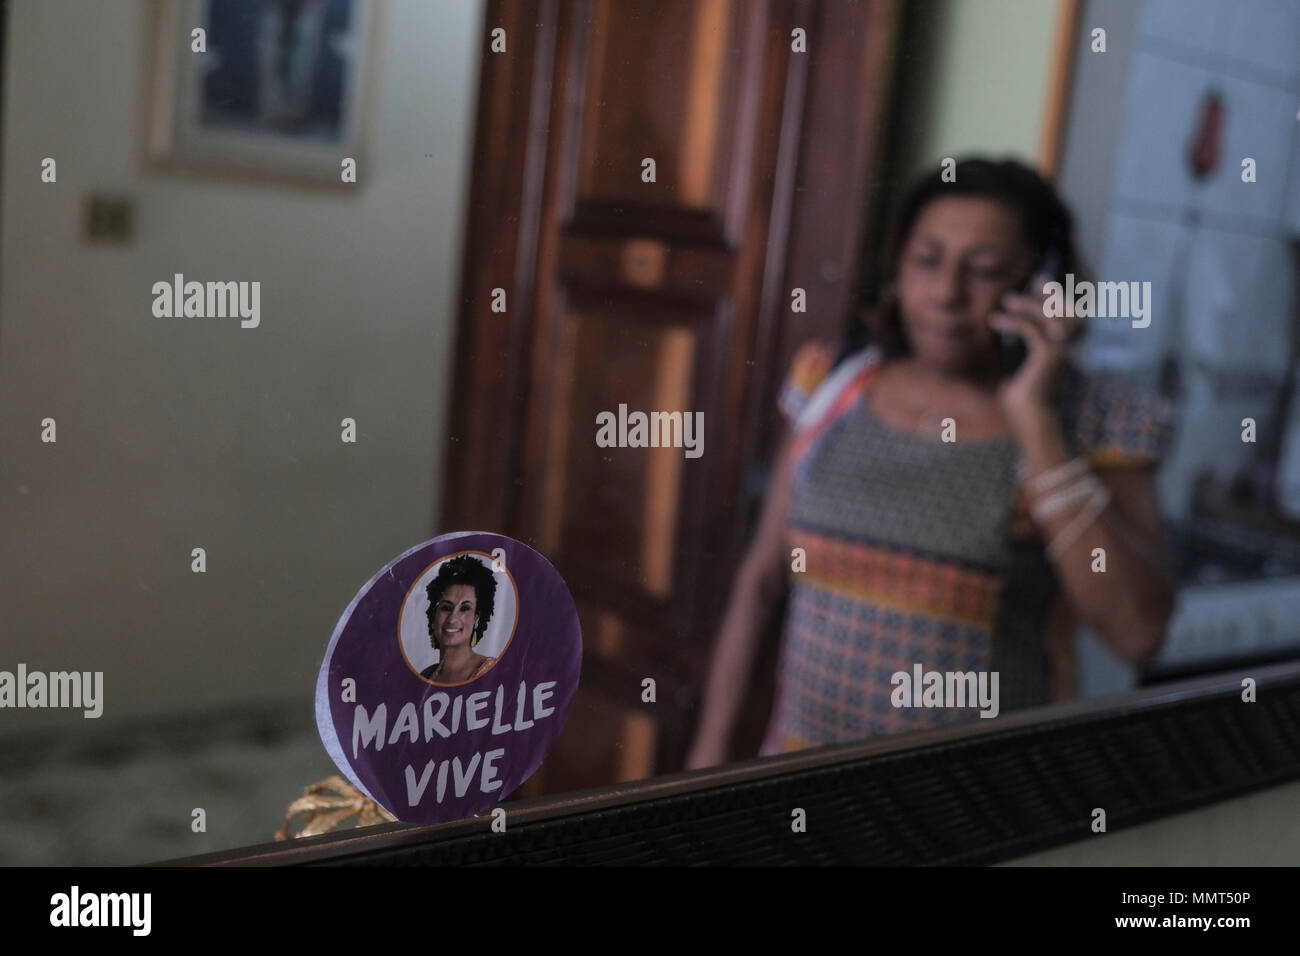 10 May 2018, Brazil, Rio de Janeiro: A sticker with the photo of the murdered politician and critic of the police brutality Marielle Franco. 'The murderers should receive mercy. Hate was never preached here', says Marinete, who will spend Mother's Day without her daughter on May 13th. The politician, who came from a slum in Rio, was one of the country's most prominent human rights activists and was a member of the city parliament for the leftist party Socialism and Freedom (PSOL). She was shot dead by unknown persons in the center of Rio. The 38-year-old had accused the police of several murde Stock Photo